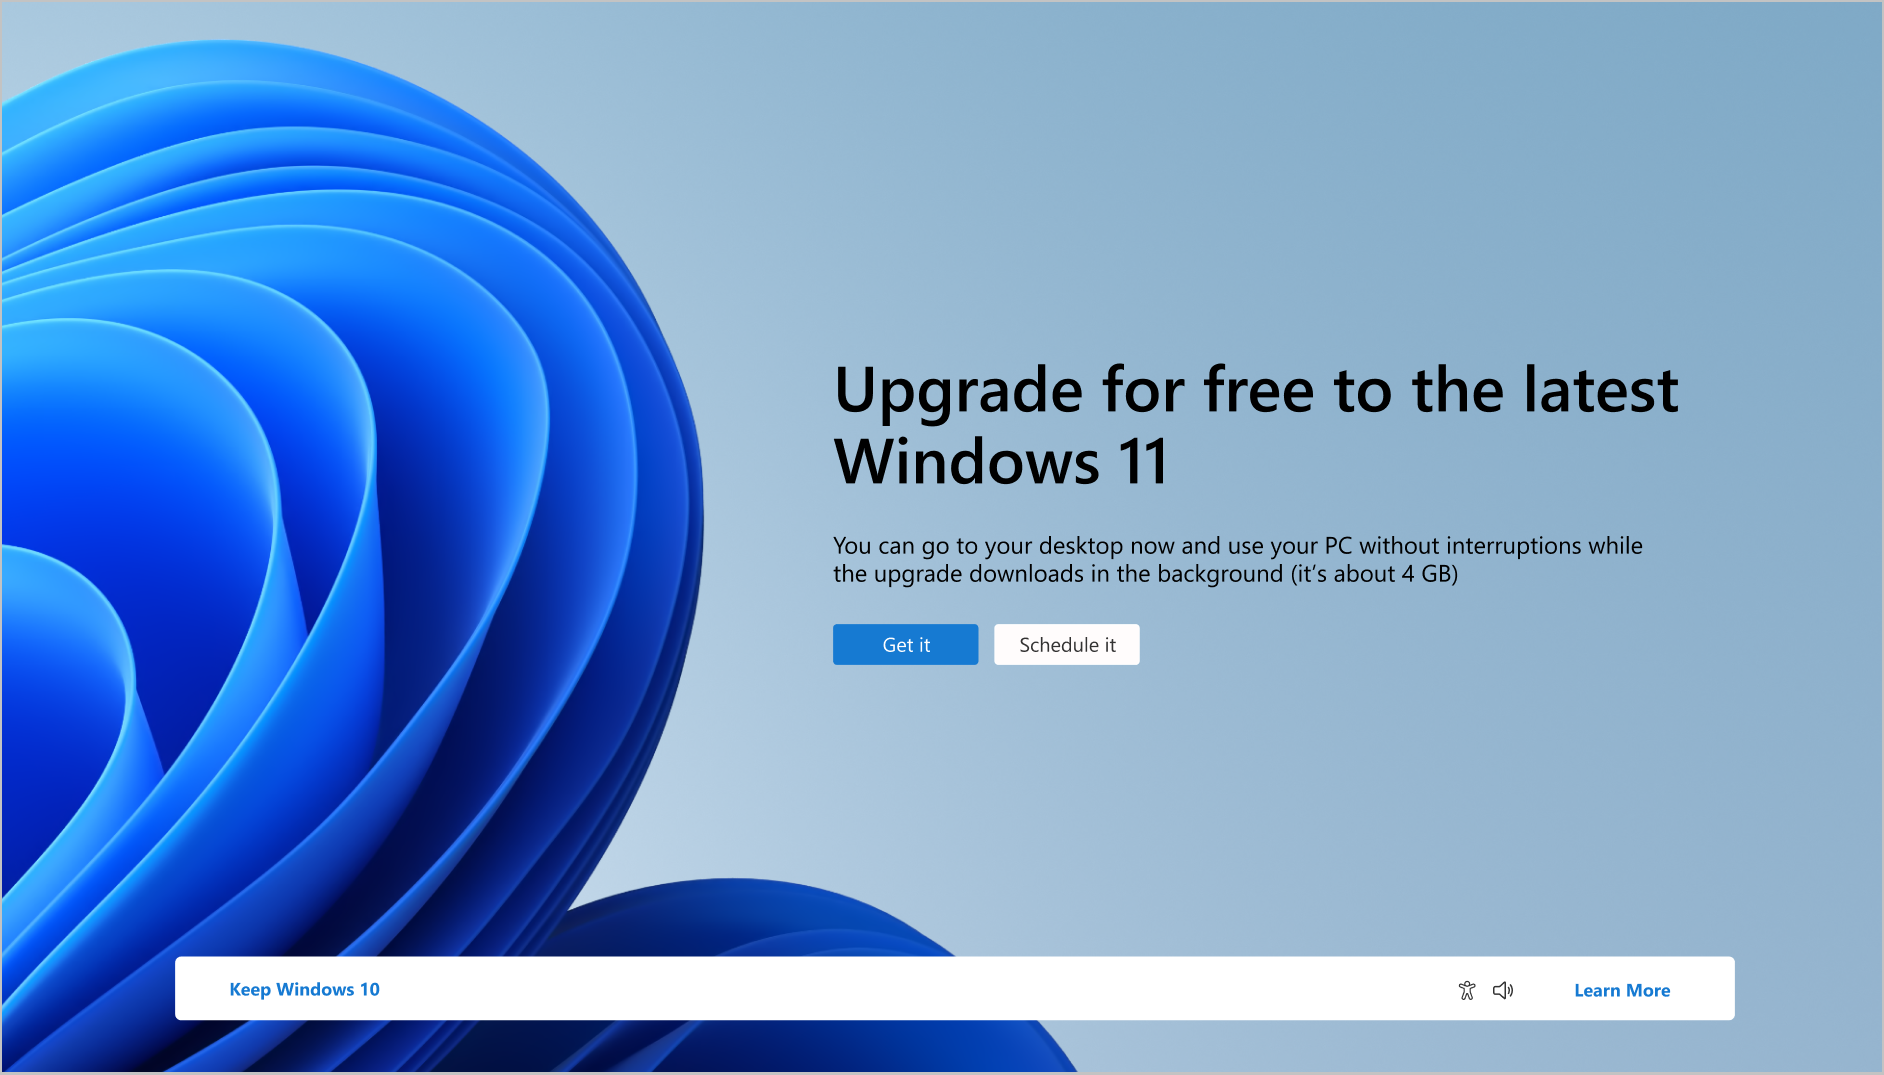 Screenshot of the notification that states the PC can upgrade for free to Windows 11.